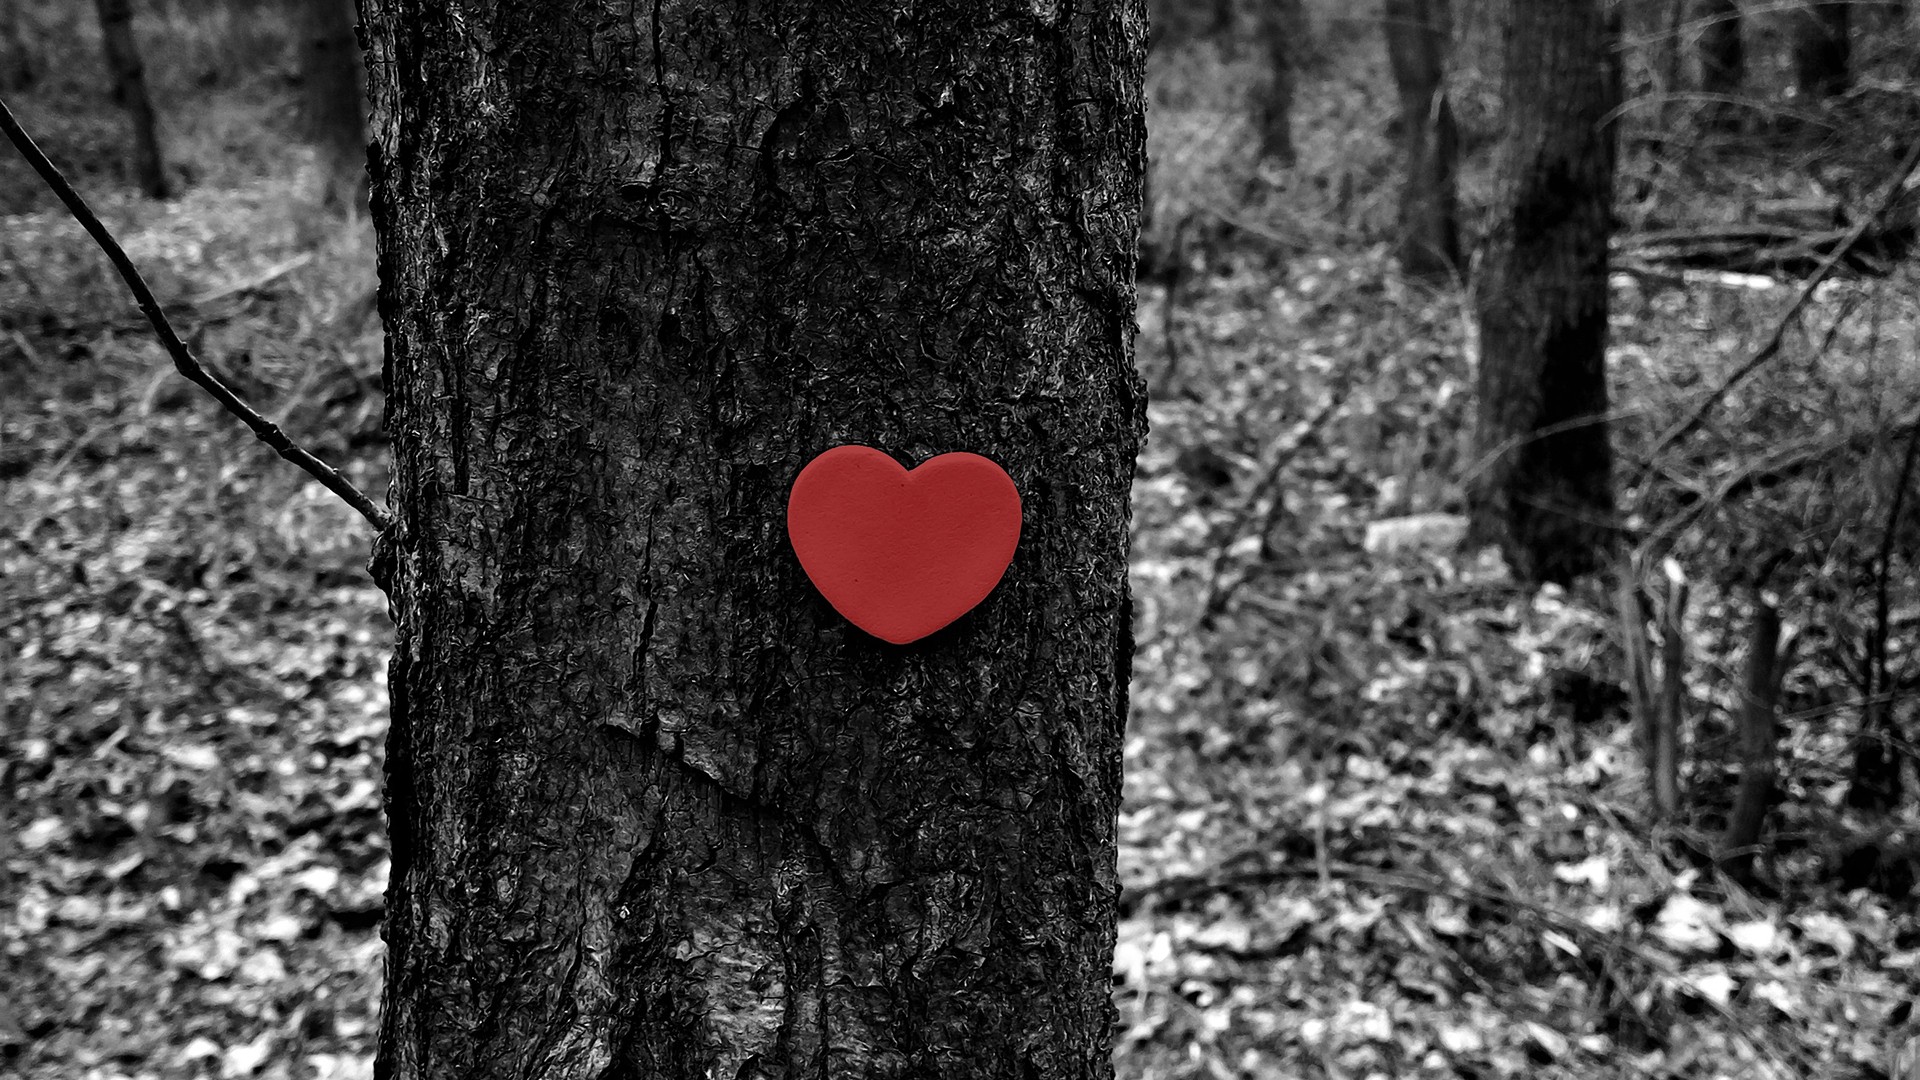 General 1920x1080 love forest trees winter fall heart (design) selective coloring